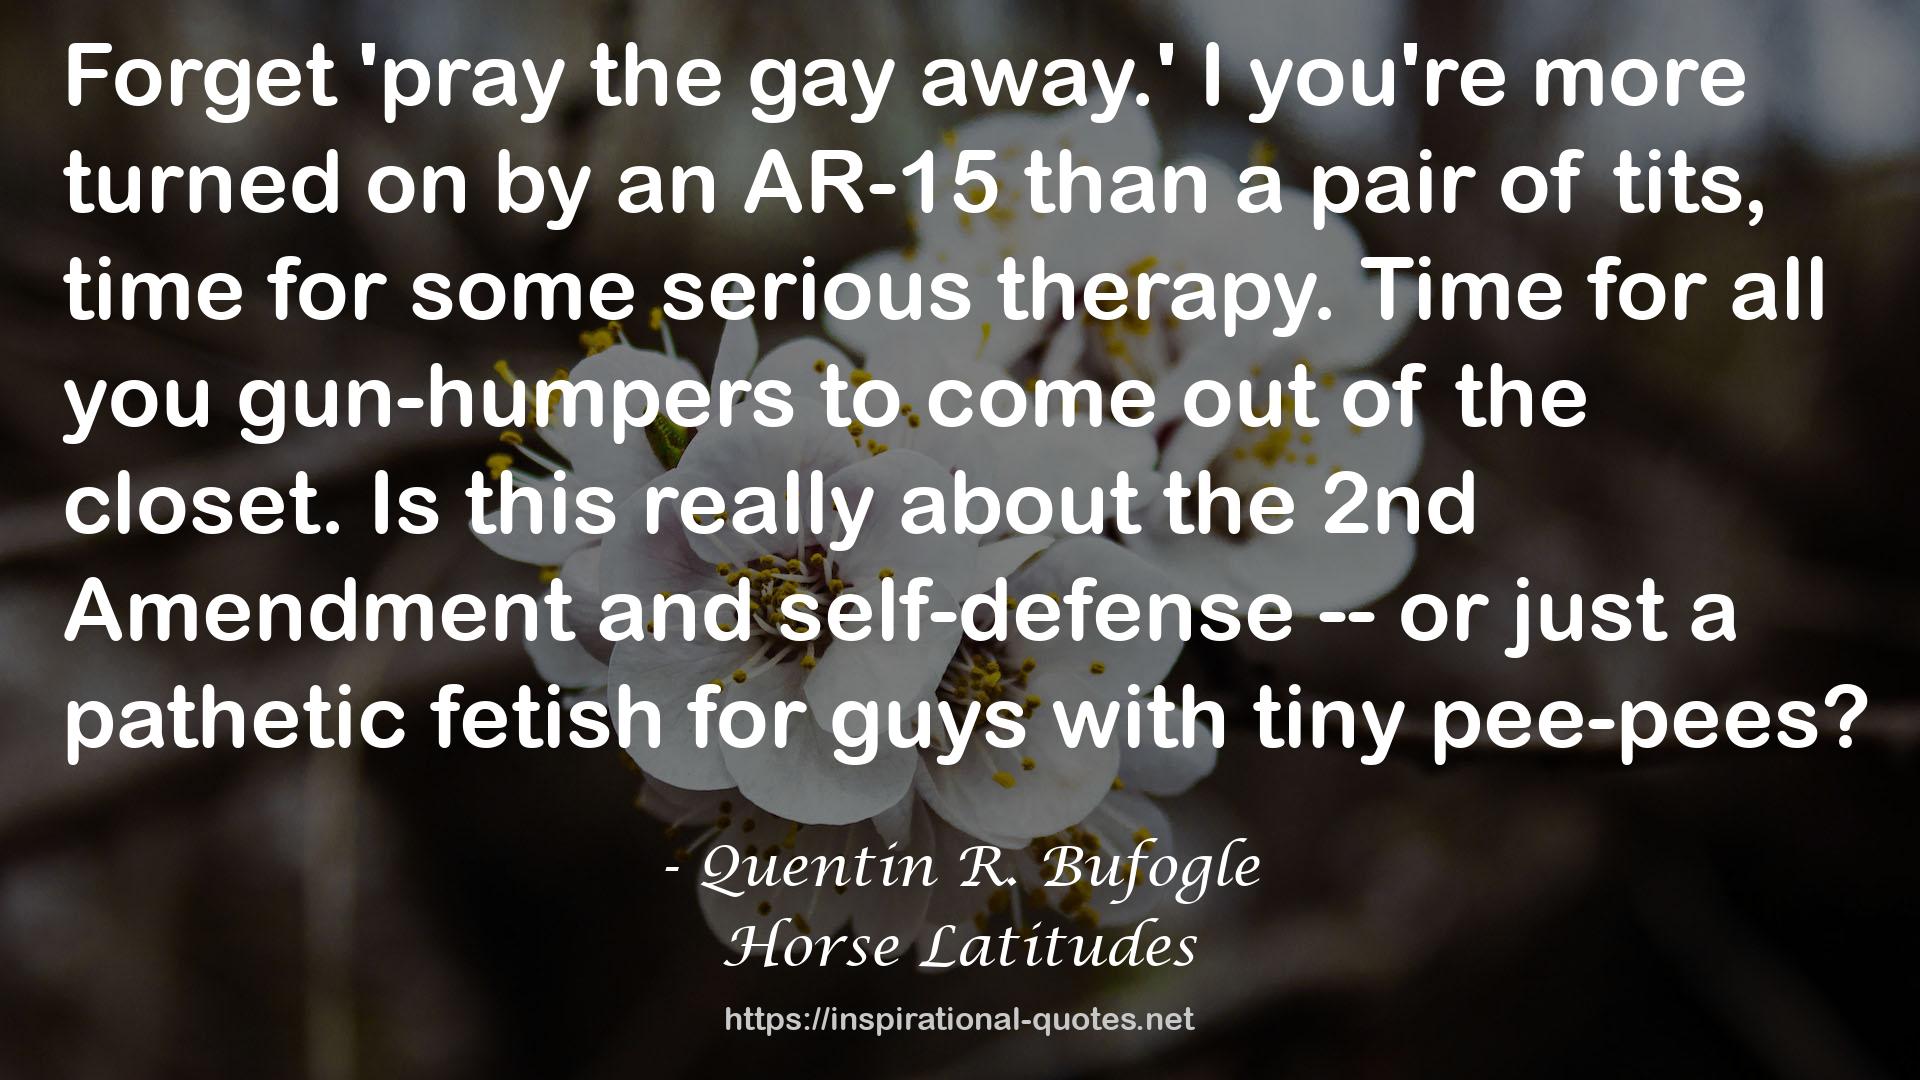 an AR-15  QUOTES